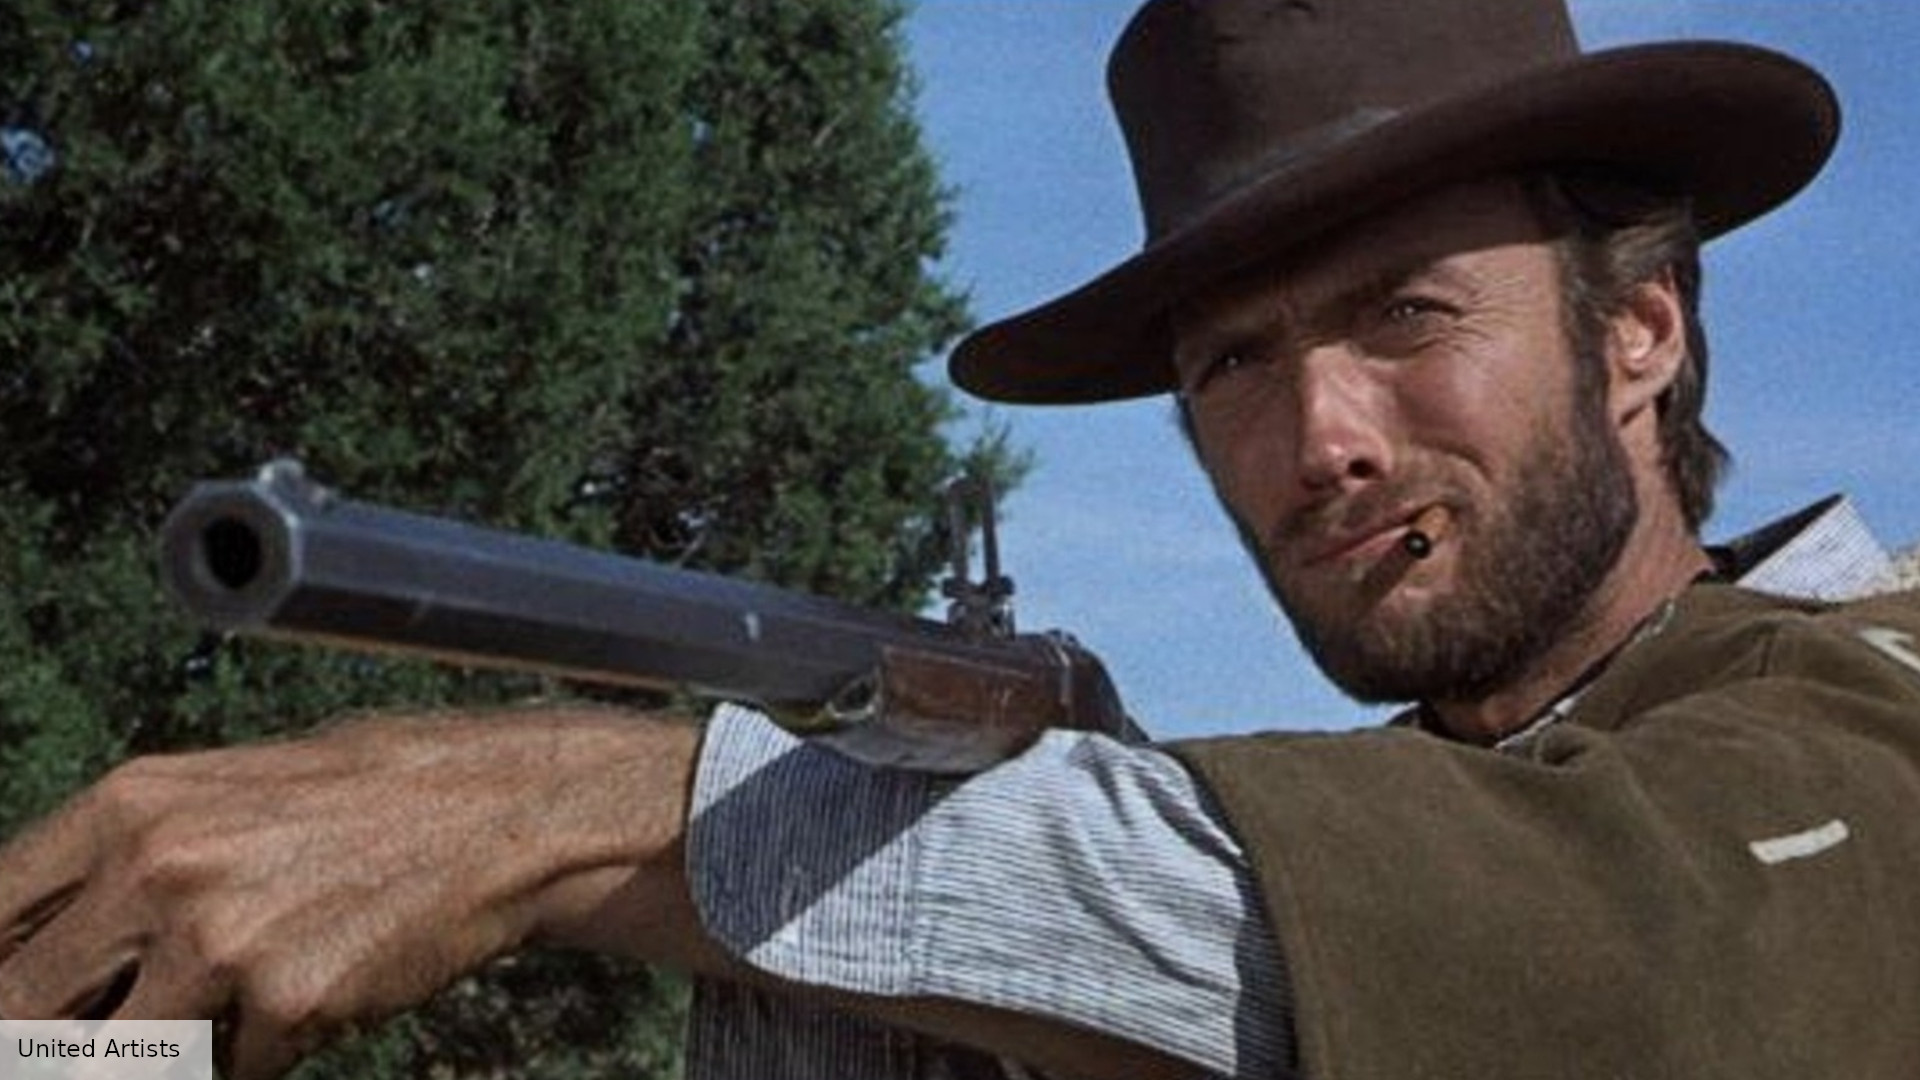 Clint Eastwood has starred in the best Westerns ever made, including The Good, The Bad, and The Ugly